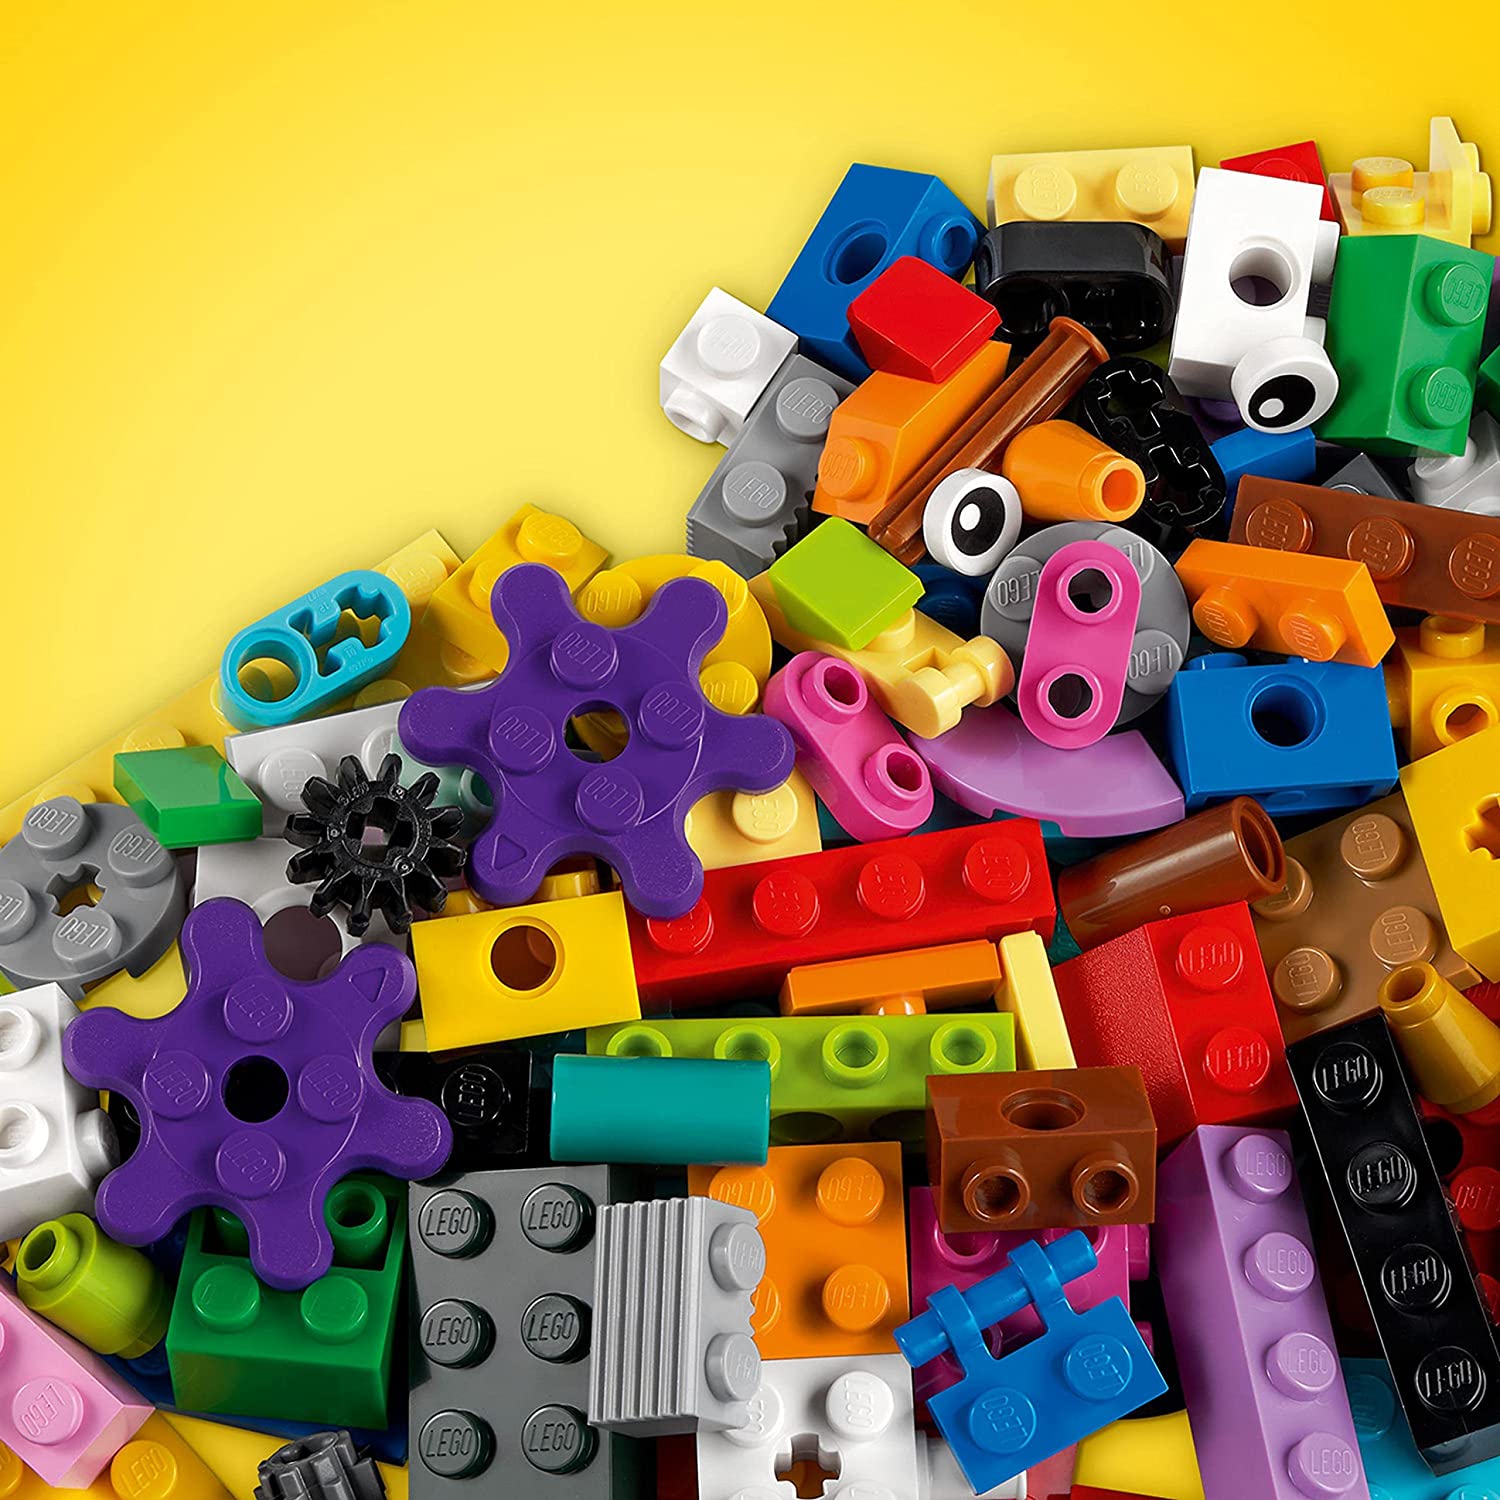 LEGO Classic Bricks and Functions Building Kit For Ages 4+